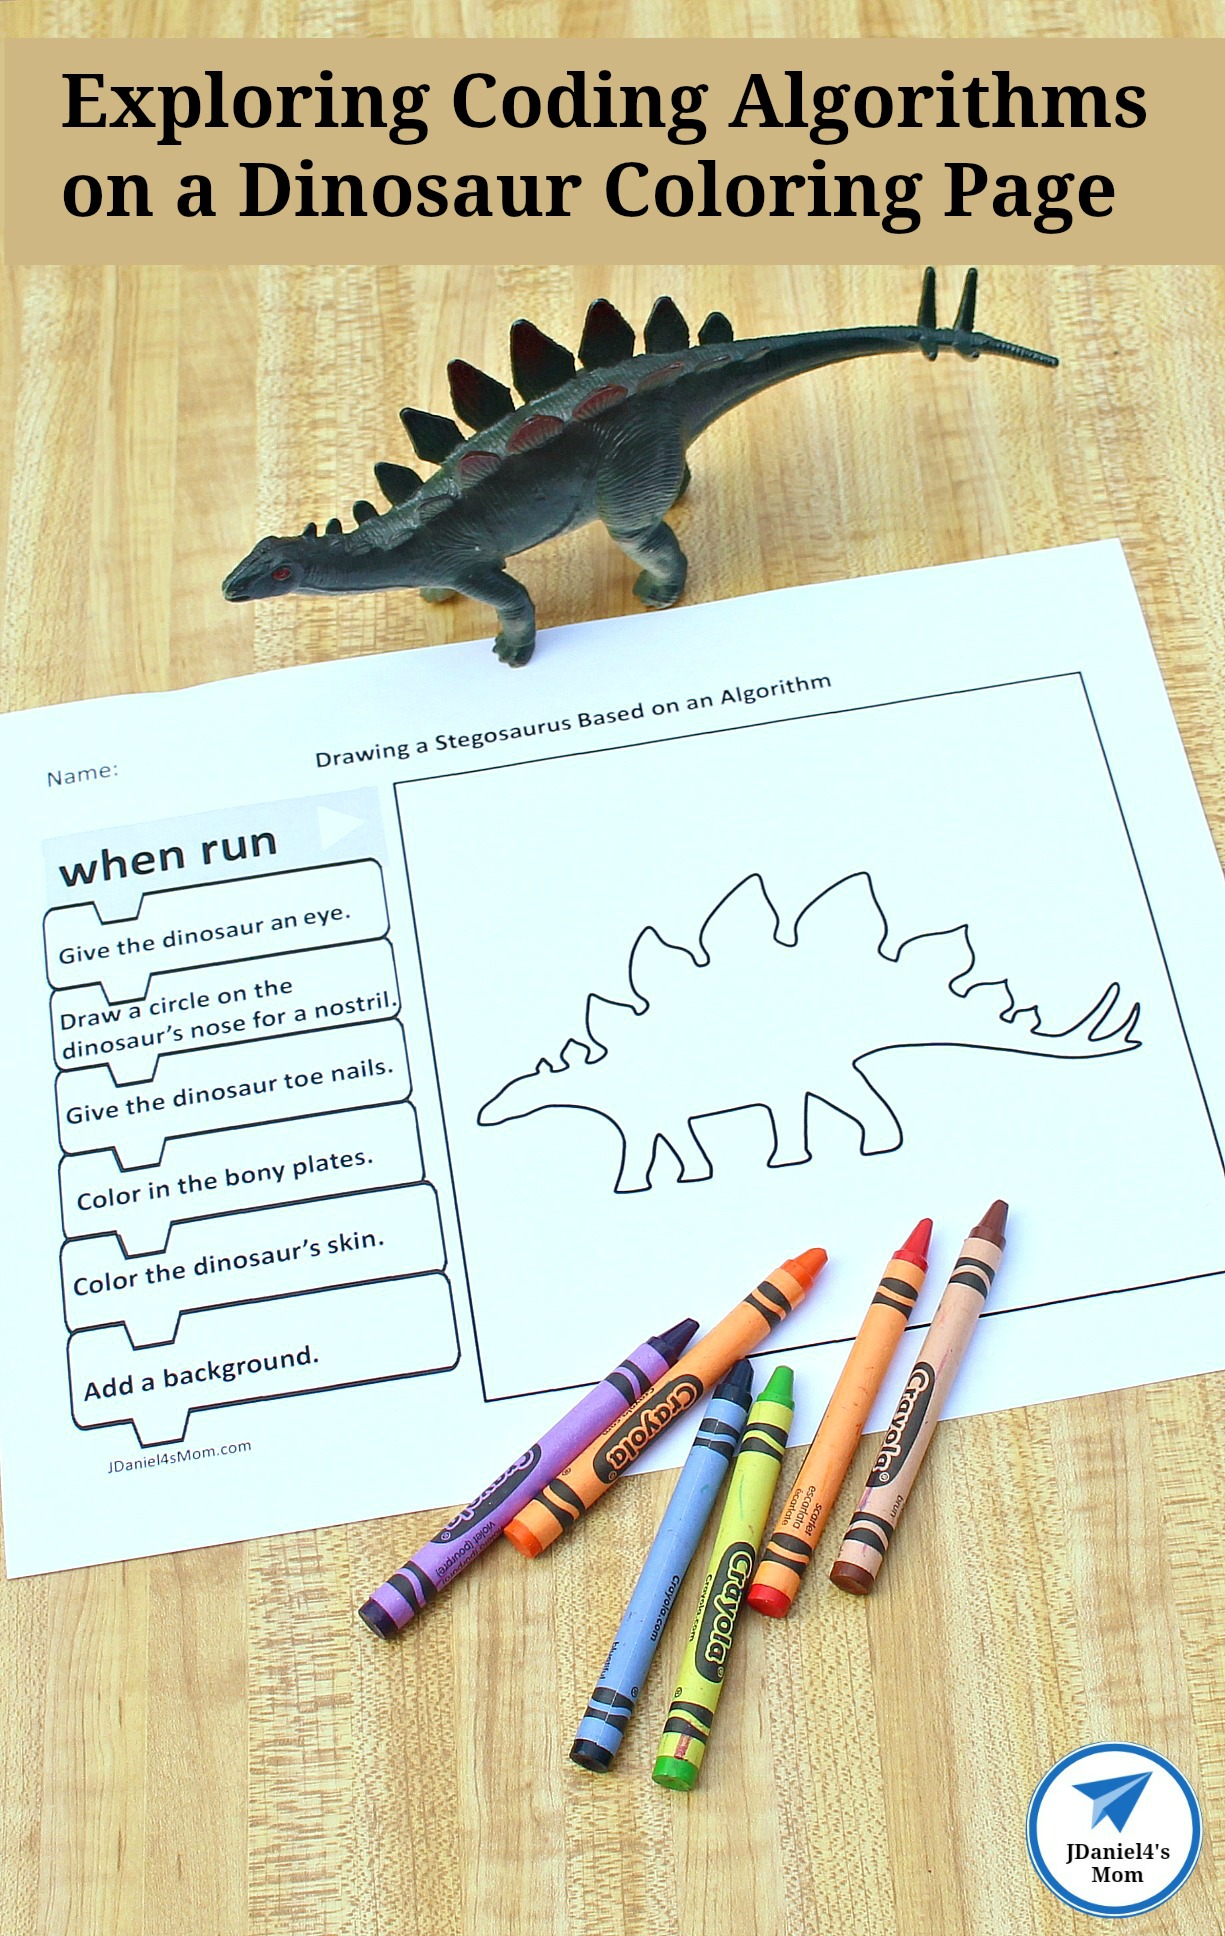 Your children at home or students at school will have fun exploring this set of dinosaur coloring pages. Each dinosaur coloring page has an algorithm your children will need to follow as they color their dinosaur. #dinosauractivity #dinosaurcoloringpage #jdaniel4smom #coding #algorithms